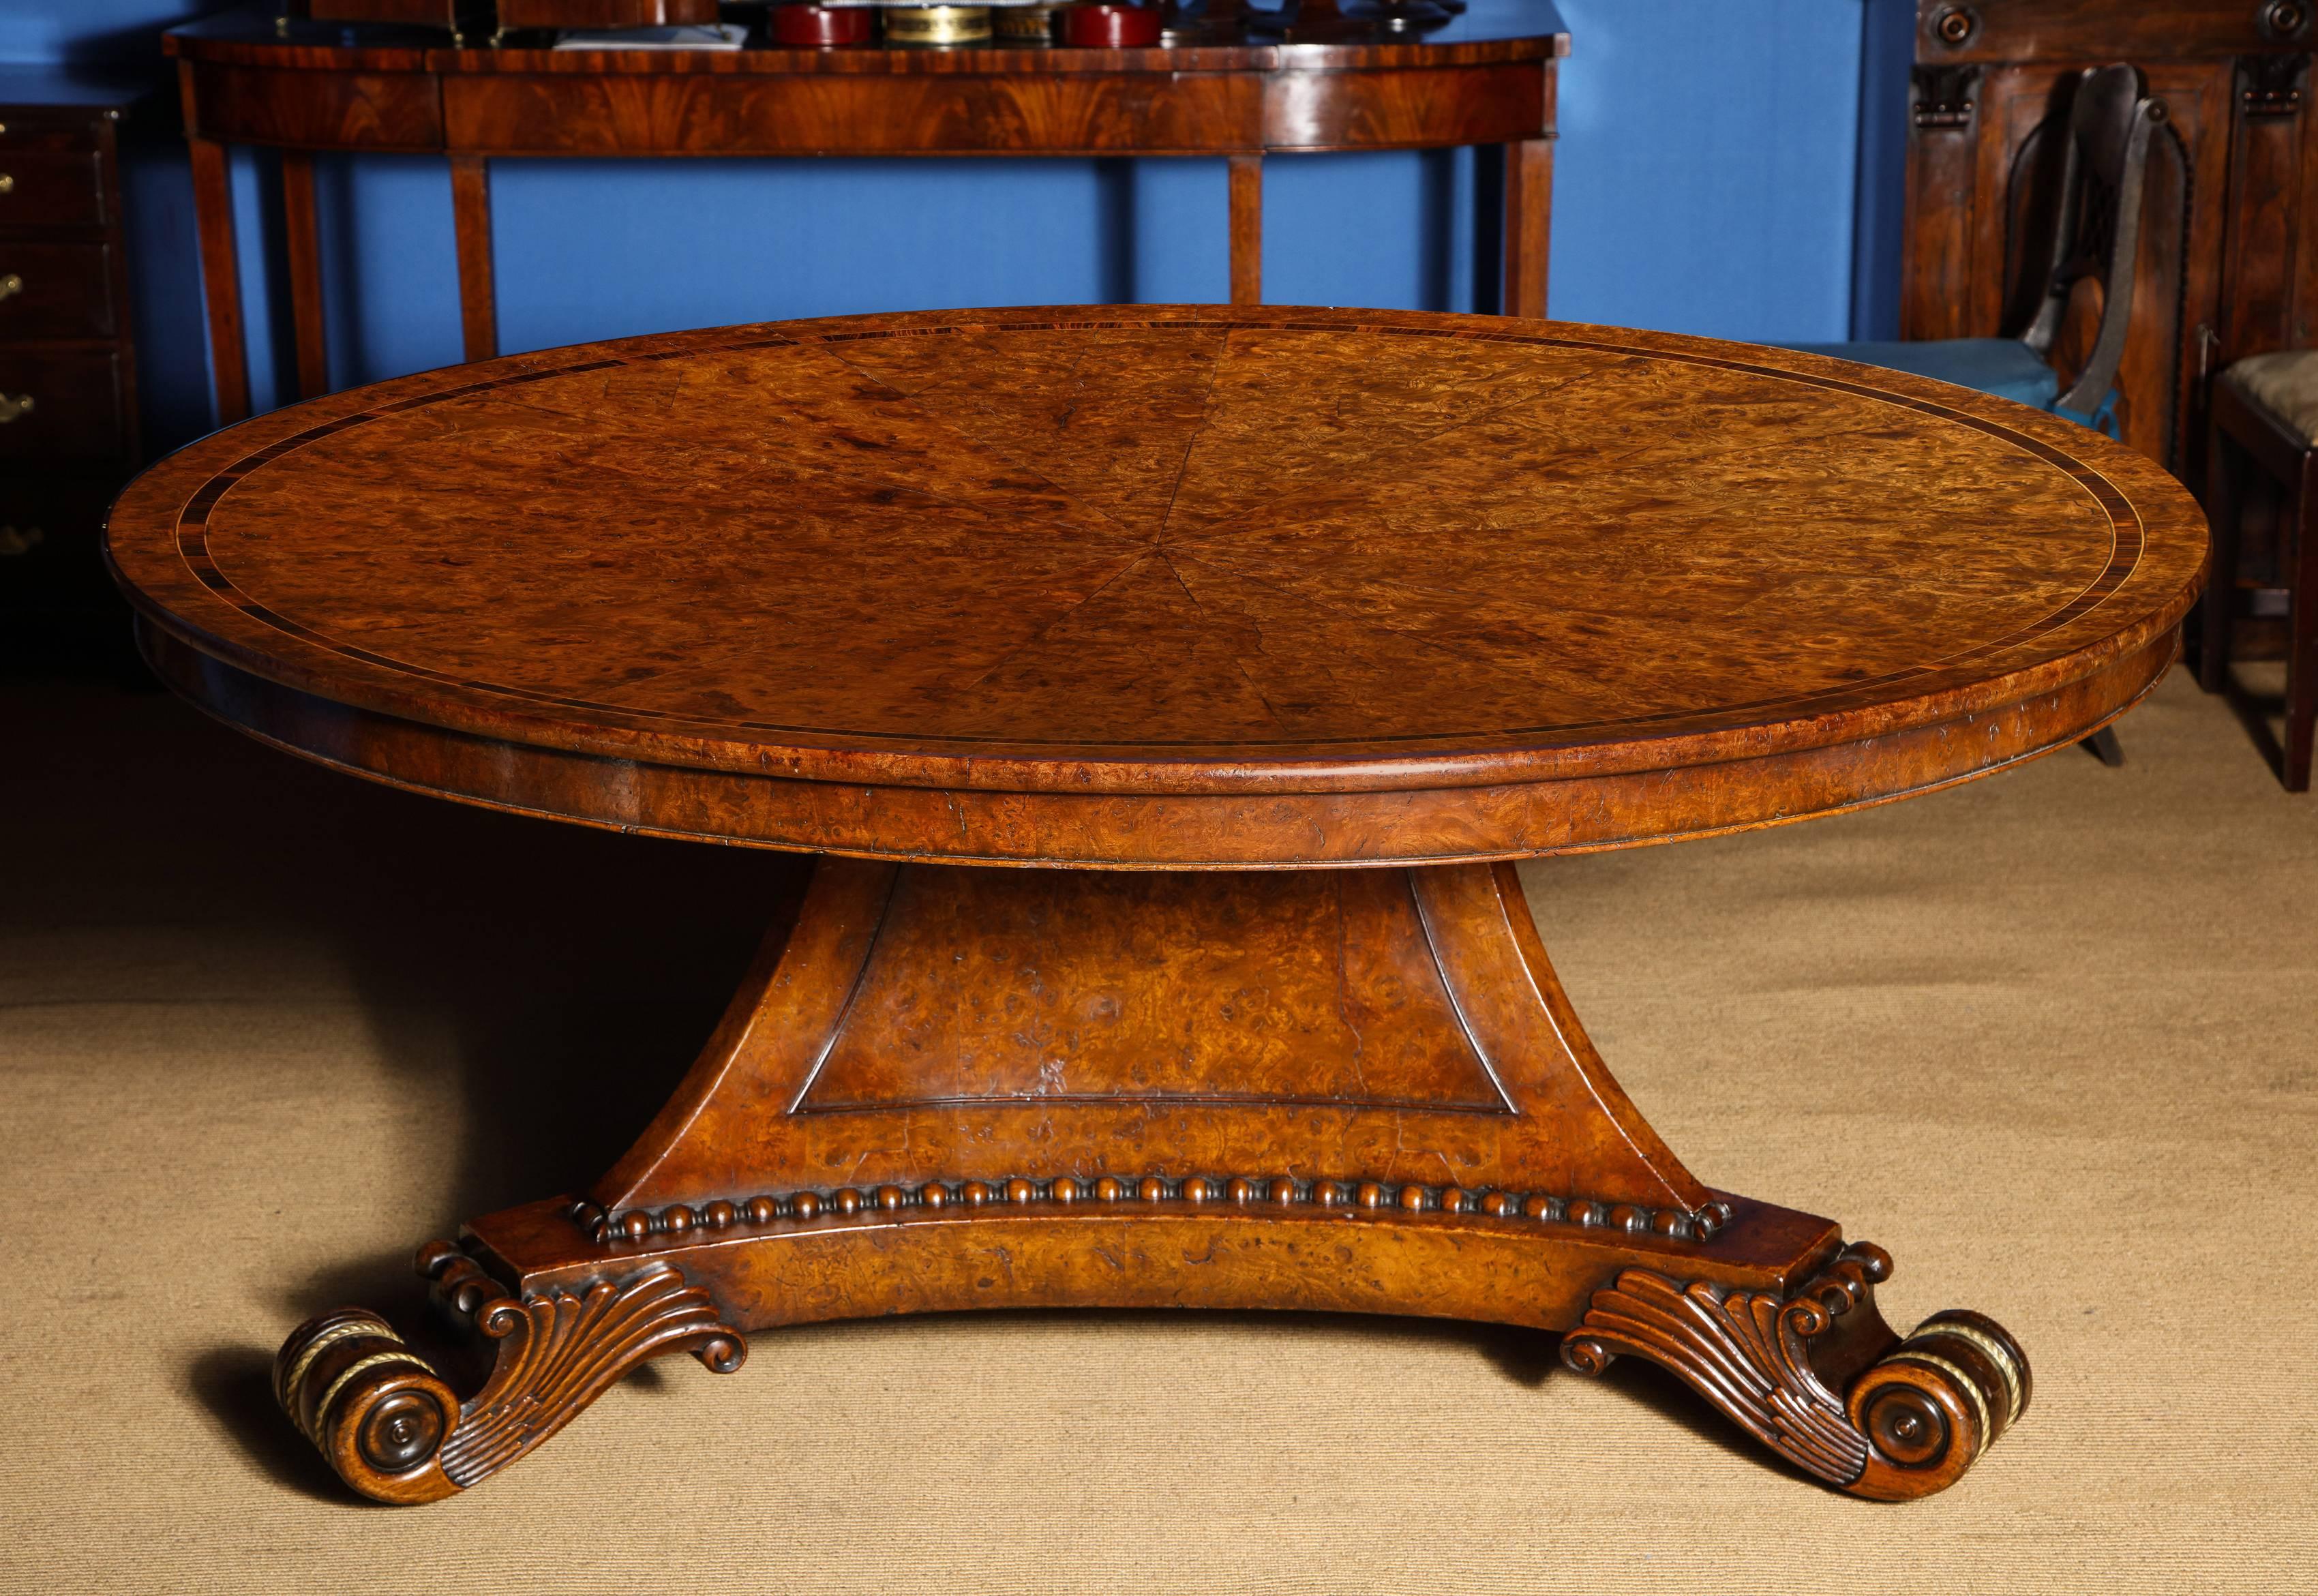 Very Fine Large Regency Period Round Pollard Elm Tilt Top Center Dining Table, the circular top with 16 sunburst figured veneers and having rosewood cross-banding and box and hare-wood line inlays with a rounded edge and narrow apron, the three